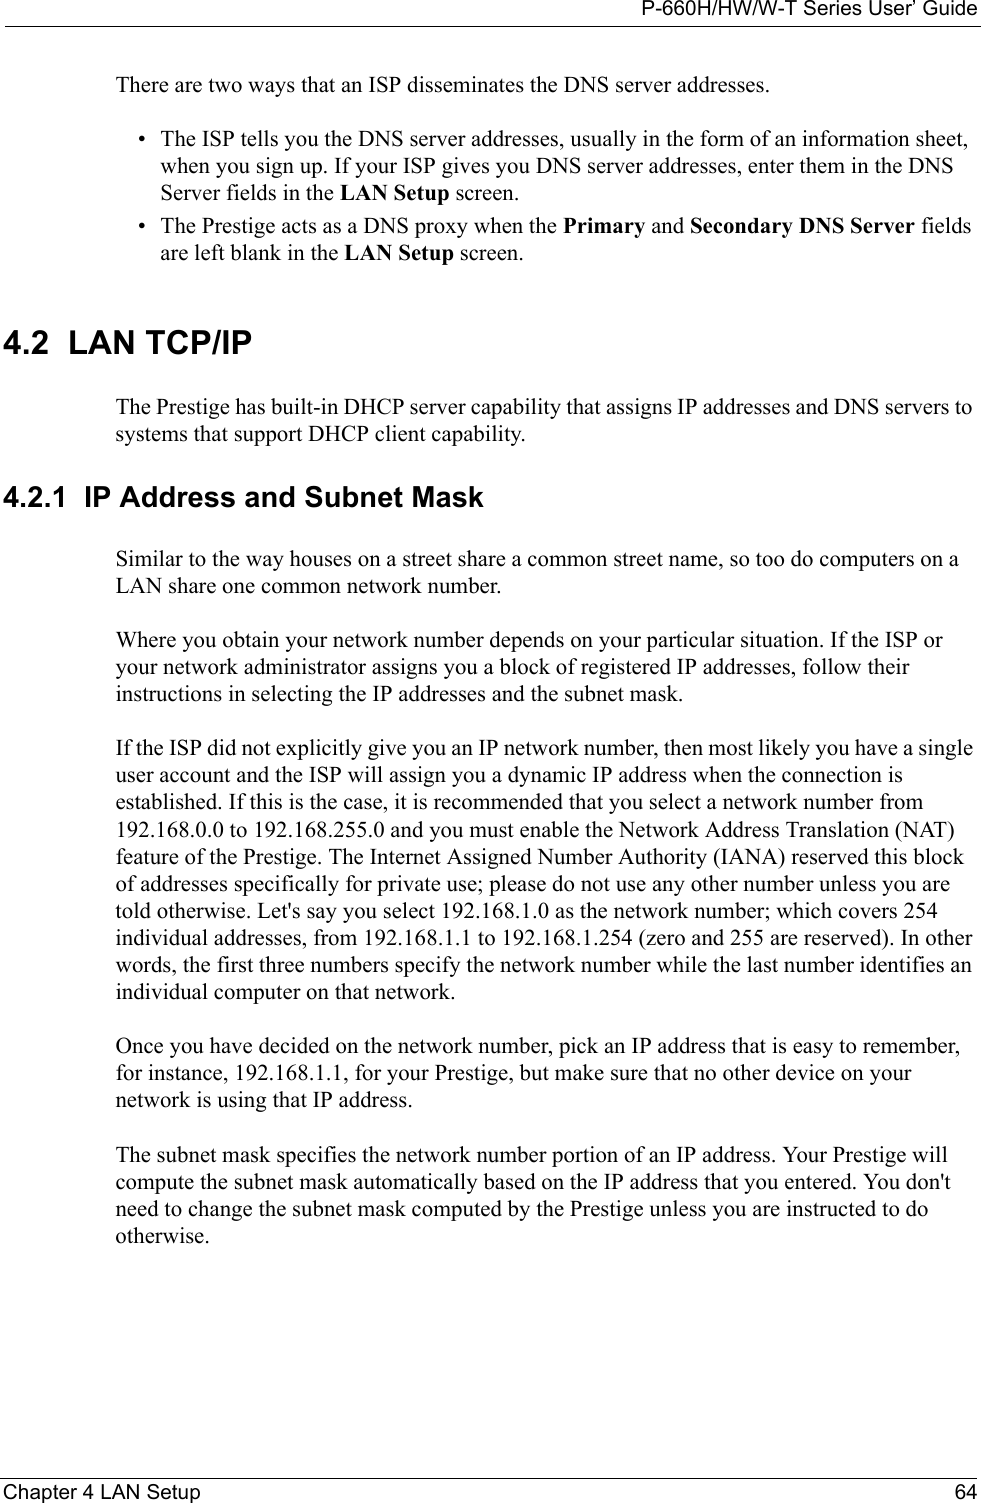 P-660H/HW/W-T Series User’ GuideChapter 4 LAN Setup 64There are two ways that an ISP disseminates the DNS server addresses. • The ISP tells you the DNS server addresses, usually in the form of an information sheet, when you sign up. If your ISP gives you DNS server addresses, enter them in the DNS Server fields in the LAN Setup screen.• The Prestige acts as a DNS proxy when the Primary and Secondary DNS Server fields are left blank in the LAN Setup screen.4.2  LAN TCP/IP The Prestige has built-in DHCP server capability that assigns IP addresses and DNS servers to systems that support DHCP client capability.4.2.1  IP Address and Subnet MaskSimilar to the way houses on a street share a common street name, so too do computers on a LAN share one common network number.Where you obtain your network number depends on your particular situation. If the ISP or your network administrator assigns you a block of registered IP addresses, follow their instructions in selecting the IP addresses and the subnet mask.If the ISP did not explicitly give you an IP network number, then most likely you have a single user account and the ISP will assign you a dynamic IP address when the connection is established. If this is the case, it is recommended that you select a network number from 192.168.0.0 to 192.168.255.0 and you must enable the Network Address Translation (NAT) feature of the Prestige. The Internet Assigned Number Authority (IANA) reserved this block of addresses specifically for private use; please do not use any other number unless you are told otherwise. Let&apos;s say you select 192.168.1.0 as the network number; which covers 254 individual addresses, from 192.168.1.1 to 192.168.1.254 (zero and 255 are reserved). In other words, the first three numbers specify the network number while the last number identifies an individual computer on that network.Once you have decided on the network number, pick an IP address that is easy to remember, for instance, 192.168.1.1, for your Prestige, but make sure that no other device on your network is using that IP address.The subnet mask specifies the network number portion of an IP address. Your Prestige will compute the subnet mask automatically based on the IP address that you entered. You don&apos;t need to change the subnet mask computed by the Prestige unless you are instructed to do otherwise.